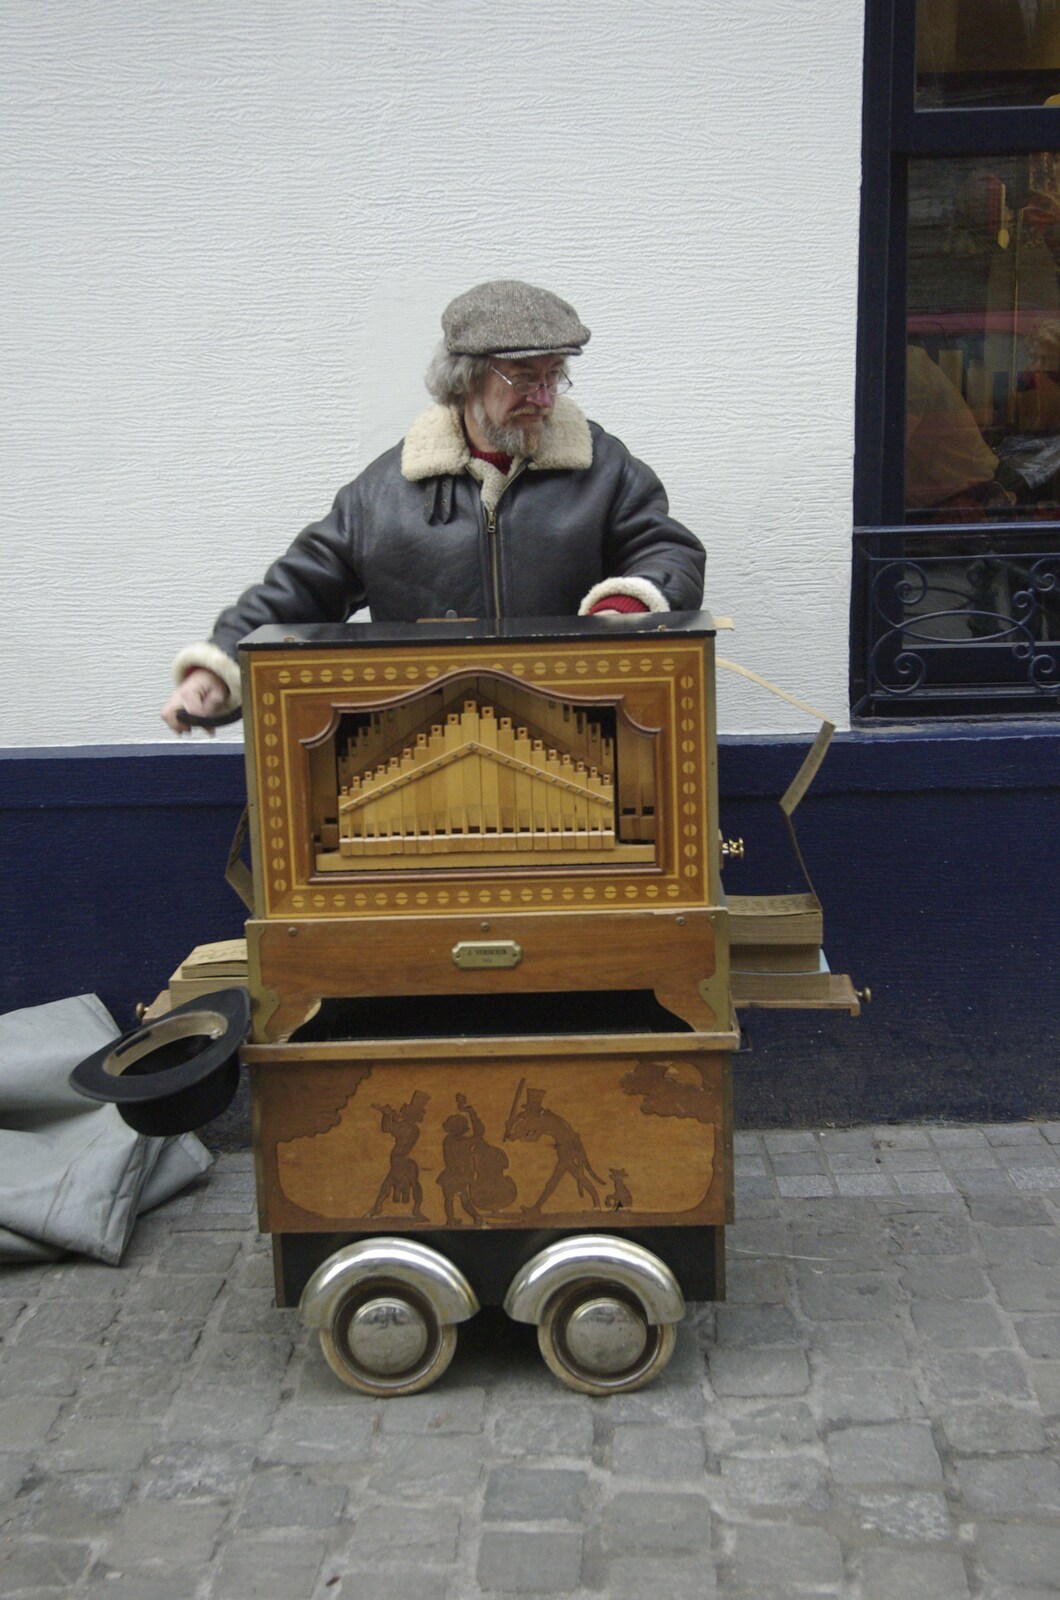 A Brussels organ grinder from The Christmas Markets of Brussels, Belgium - 1st January 2007